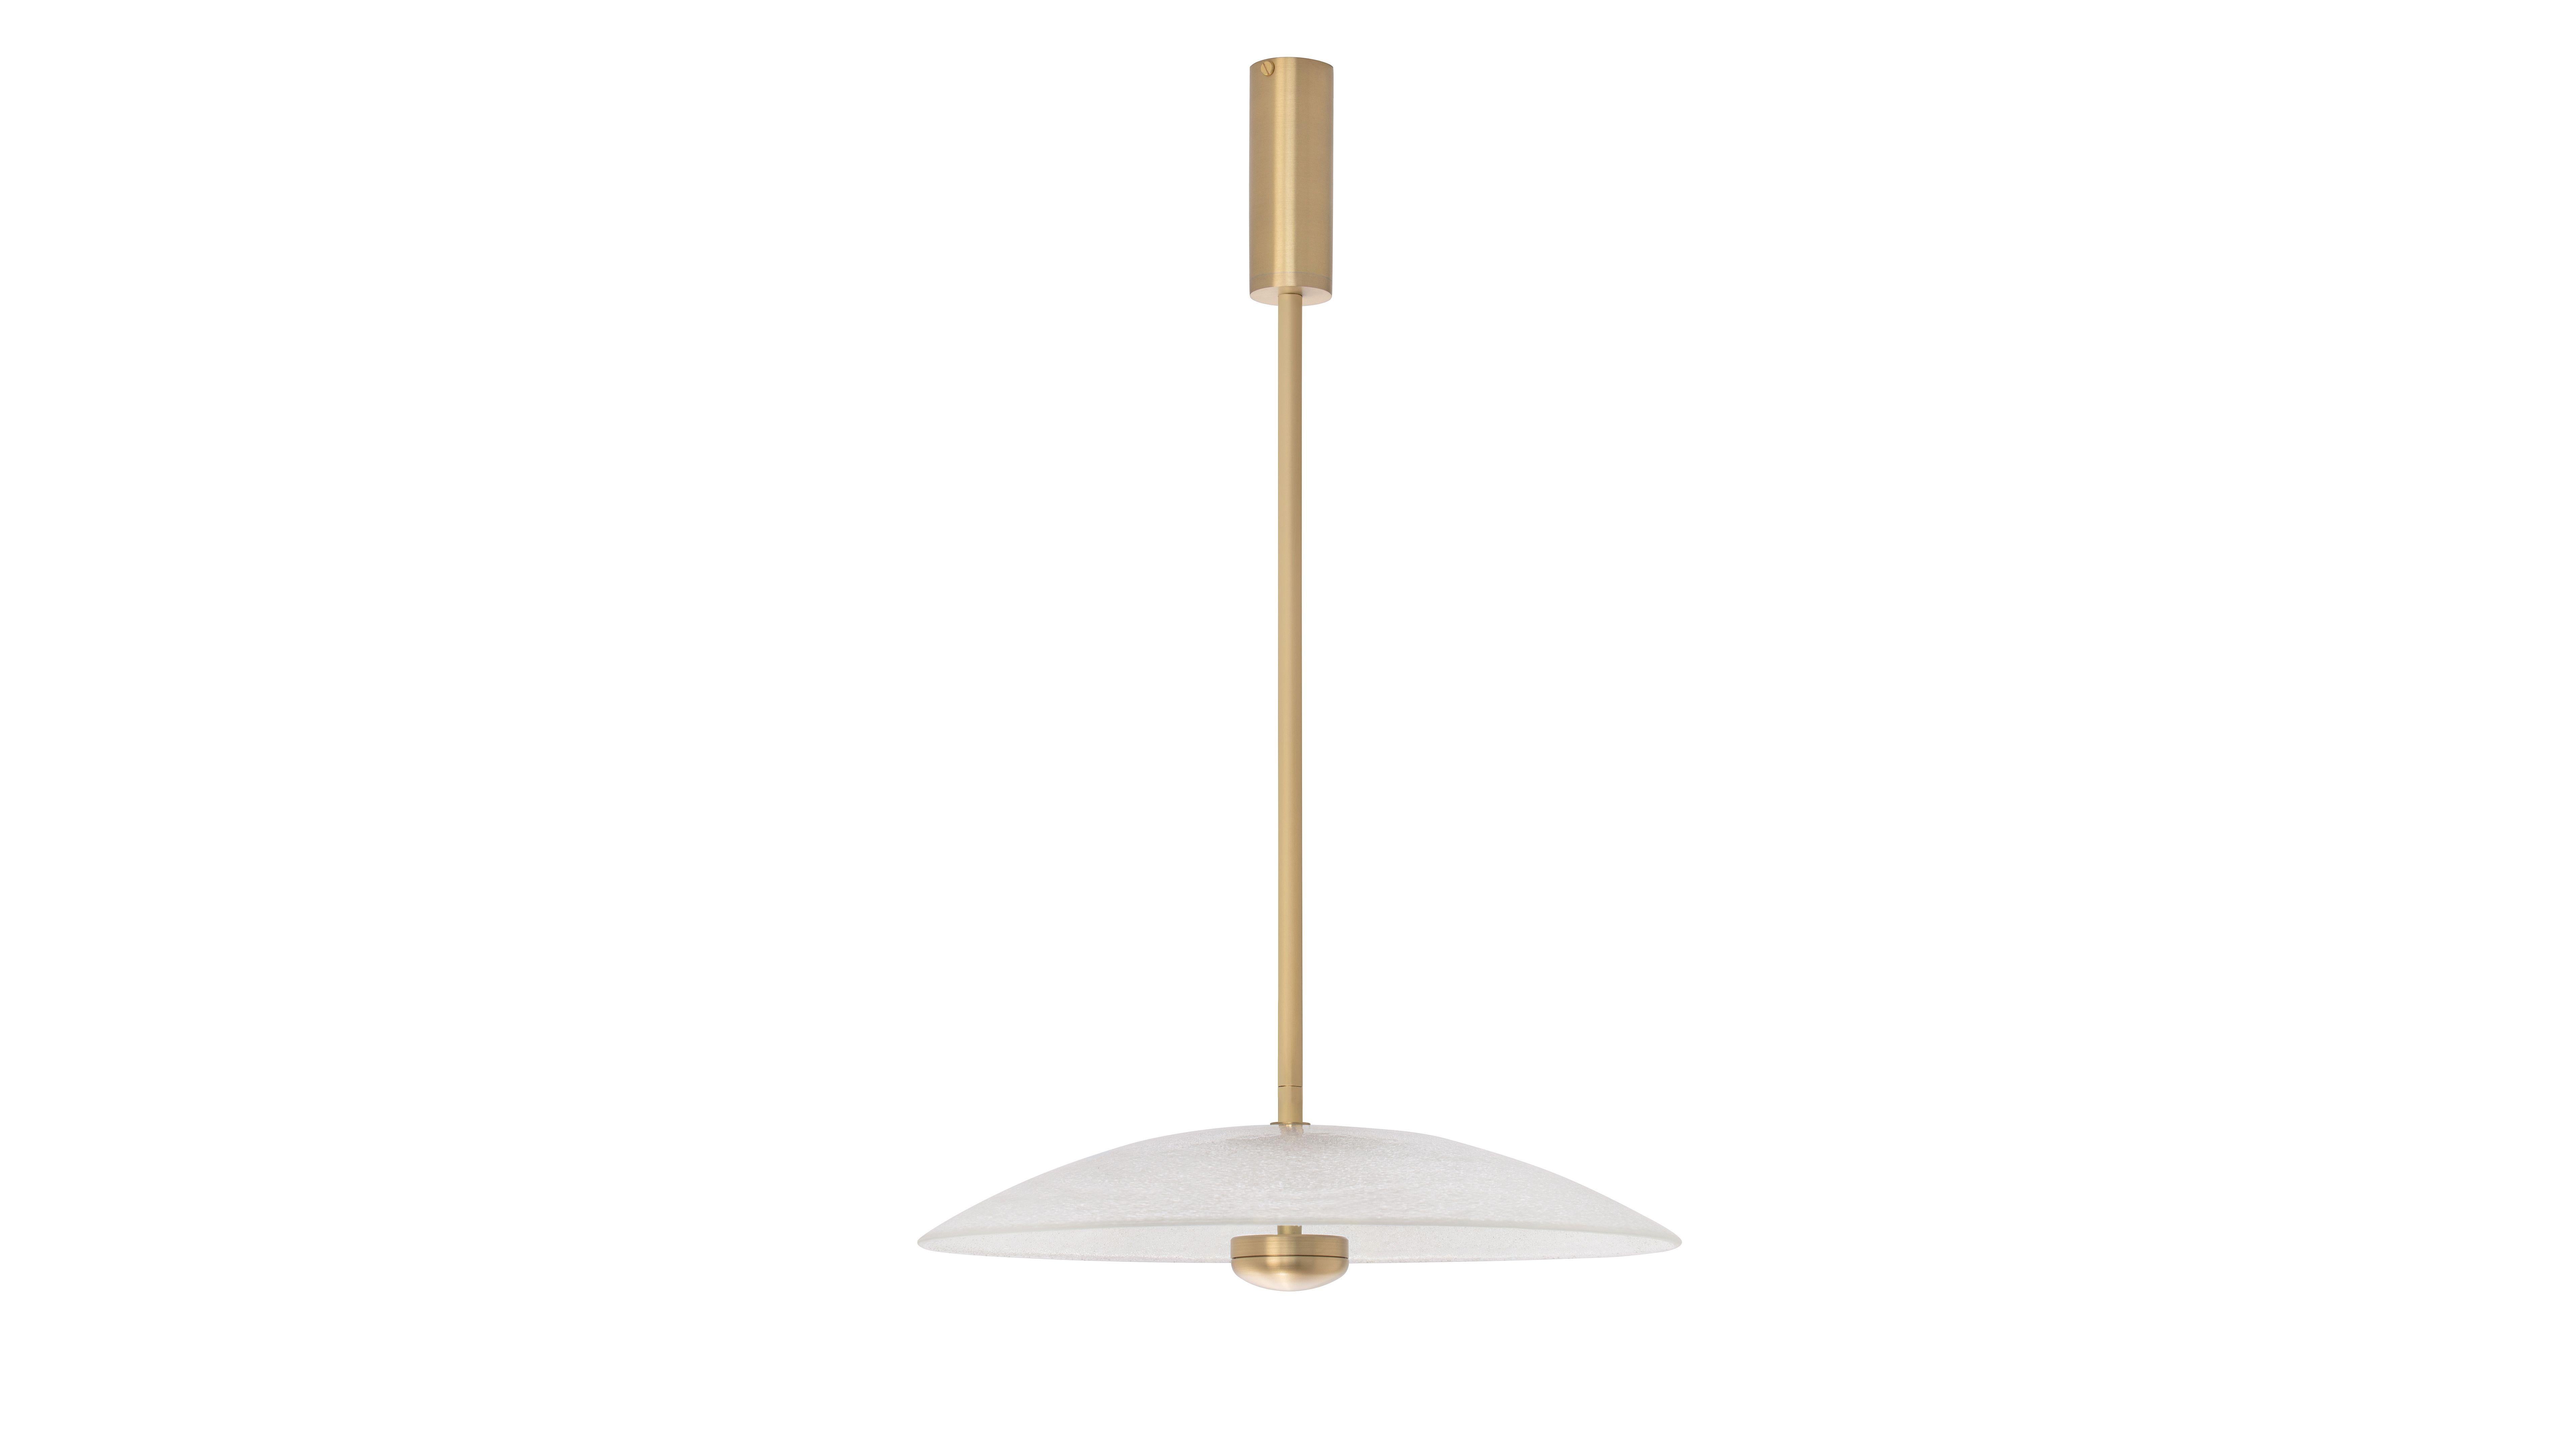 Brass Cielo large pendant by CTO Lighting
Materials: Satin brass with hand fritted glass
Dimensions: W 38.5 x D 38.5 x H 22.5 cm

Integrated LED - trailing dimmable - 8w - 2700k
weight 4.5kg (9.9lbs)
supplied with 1000mm drop rod
for installation a